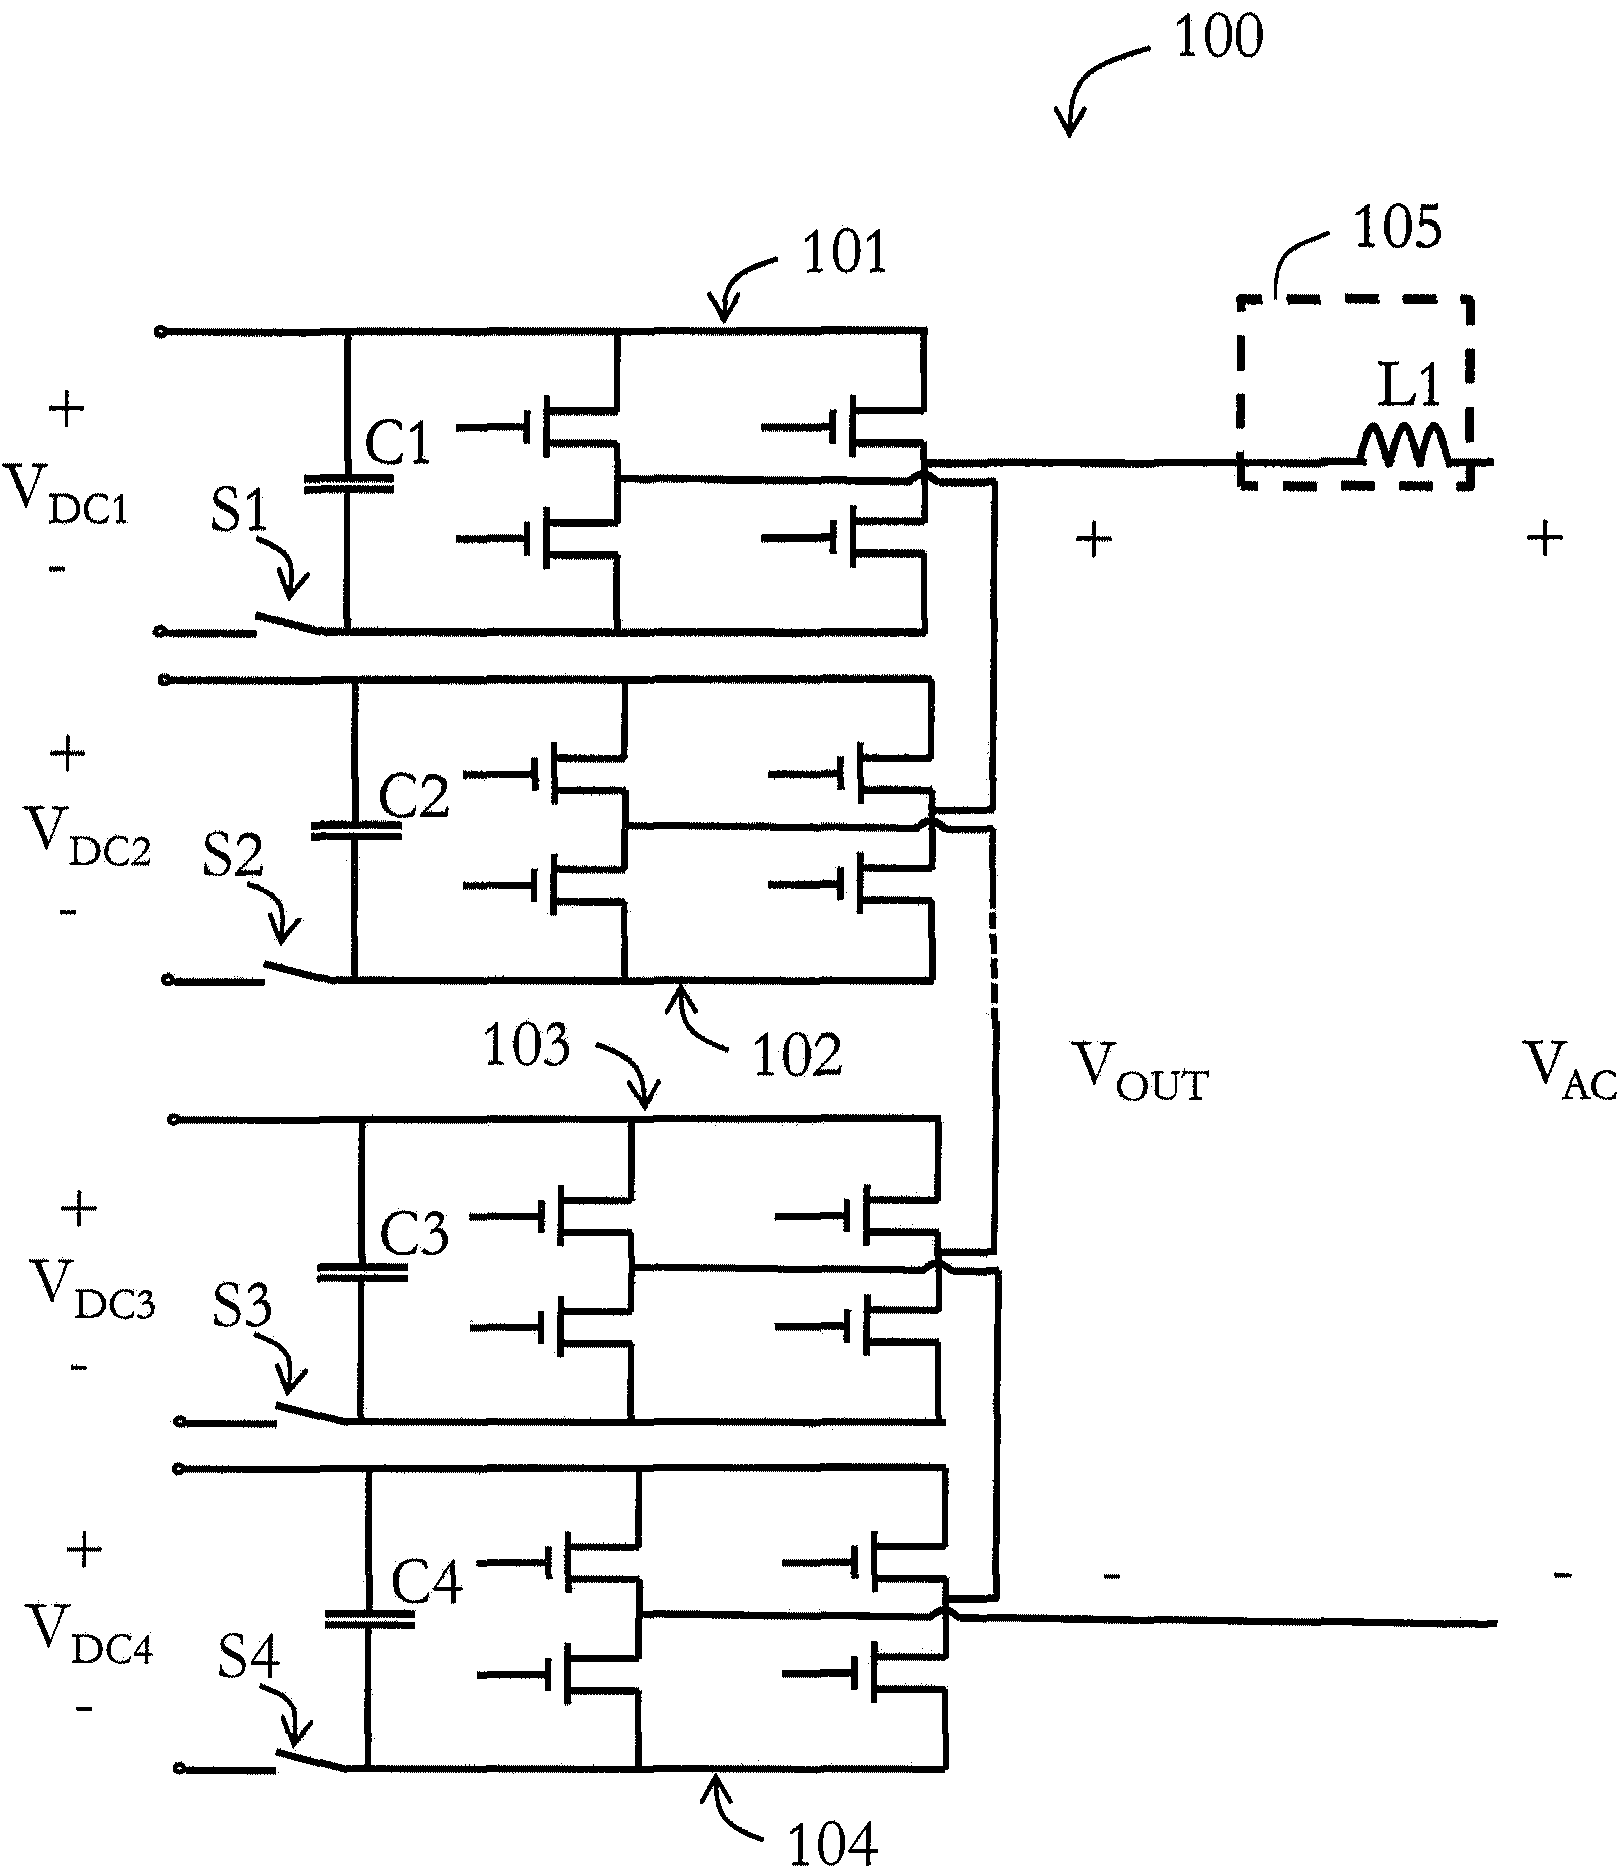 DC-AC inverter for photovoltaic systems